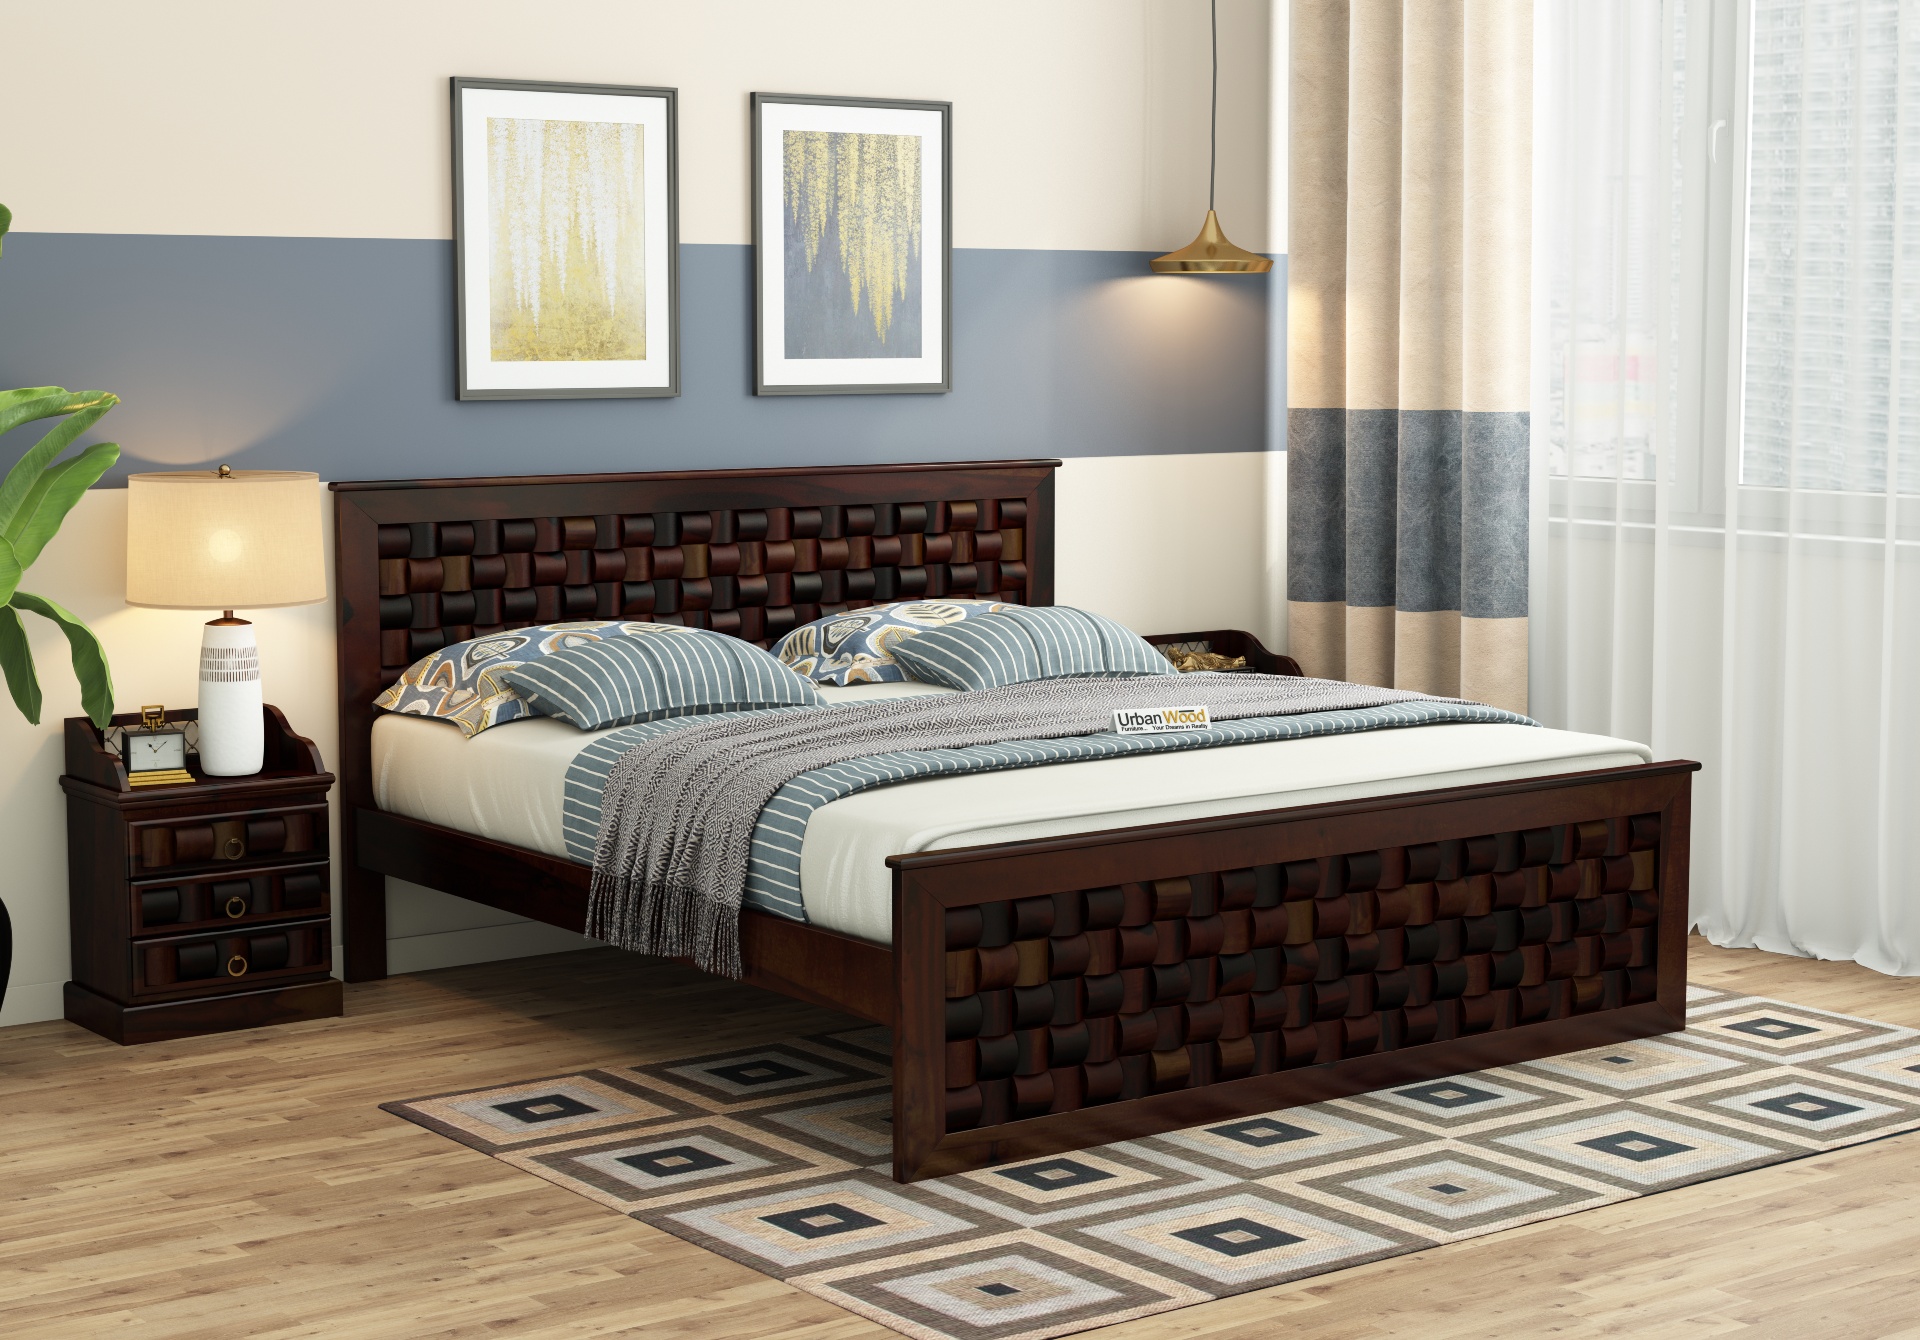 Hover Bed Without Storage ( Queen Size, Walnut Finish )